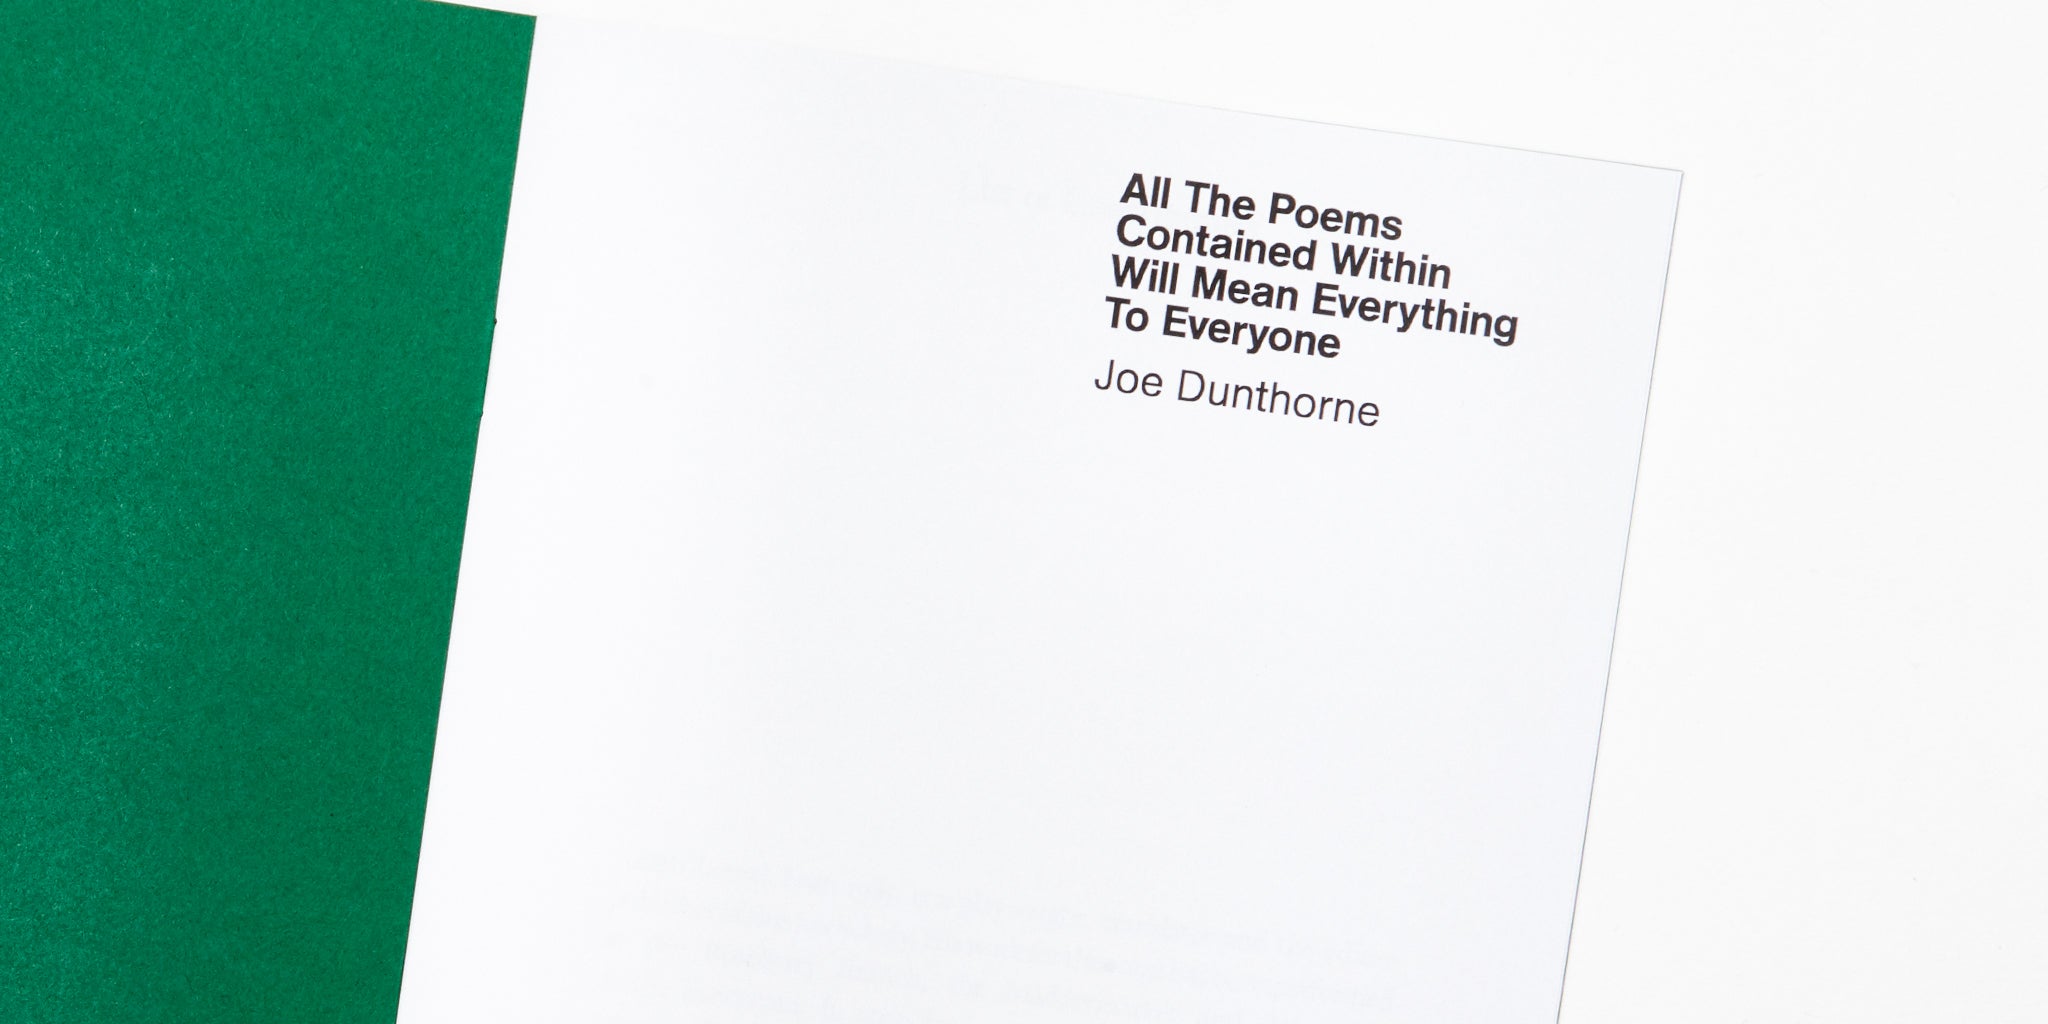 ALL THE POEMS CONTAINED WITHIN WILL MEAN EVERYTHING TO EVERYONE - Joe Dunthorne